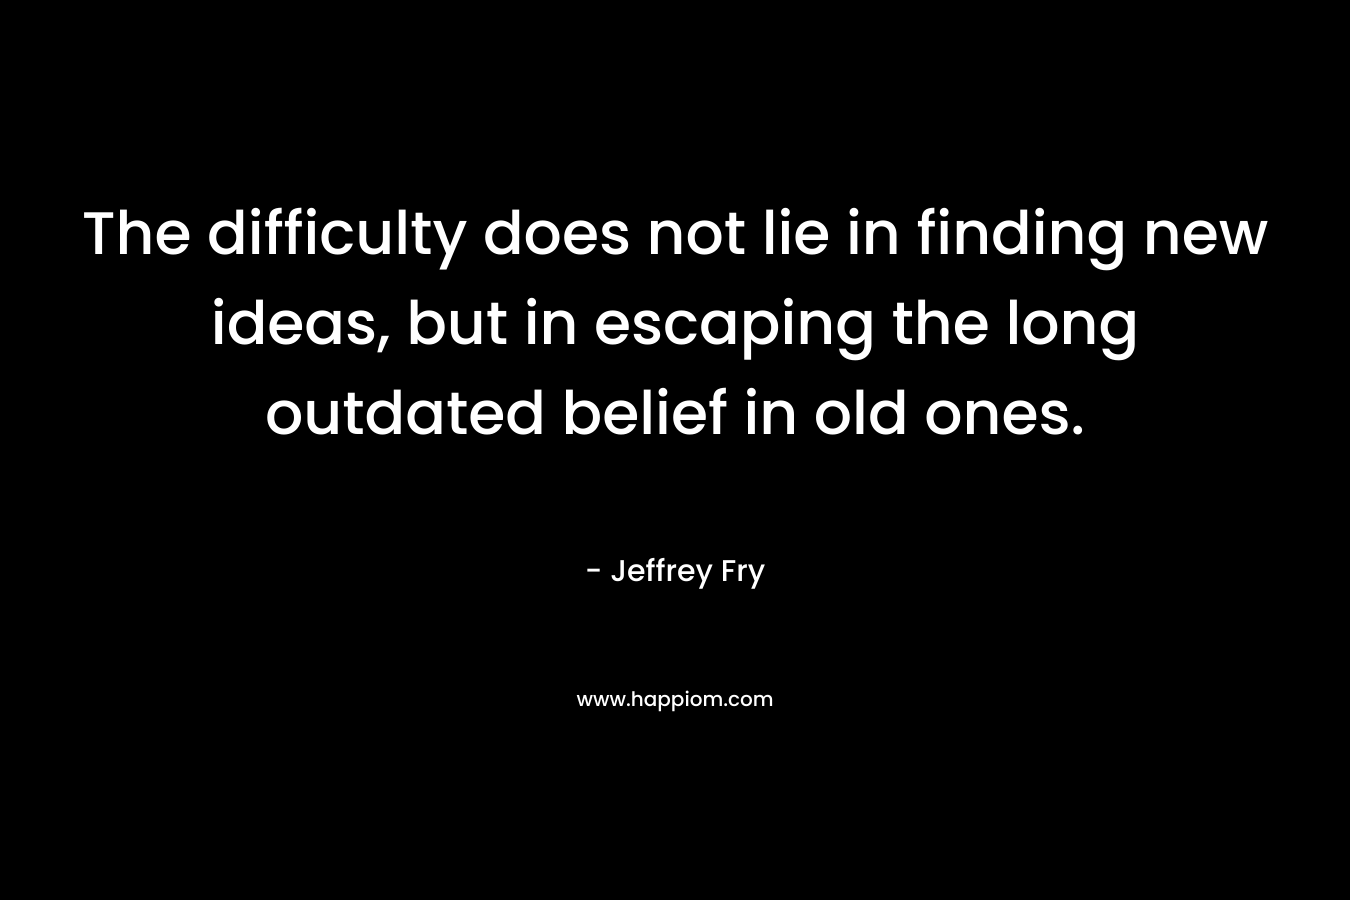 The difficulty does not lie in finding new ideas, but in escaping the long outdated belief in old ones. – Jeffrey Fry